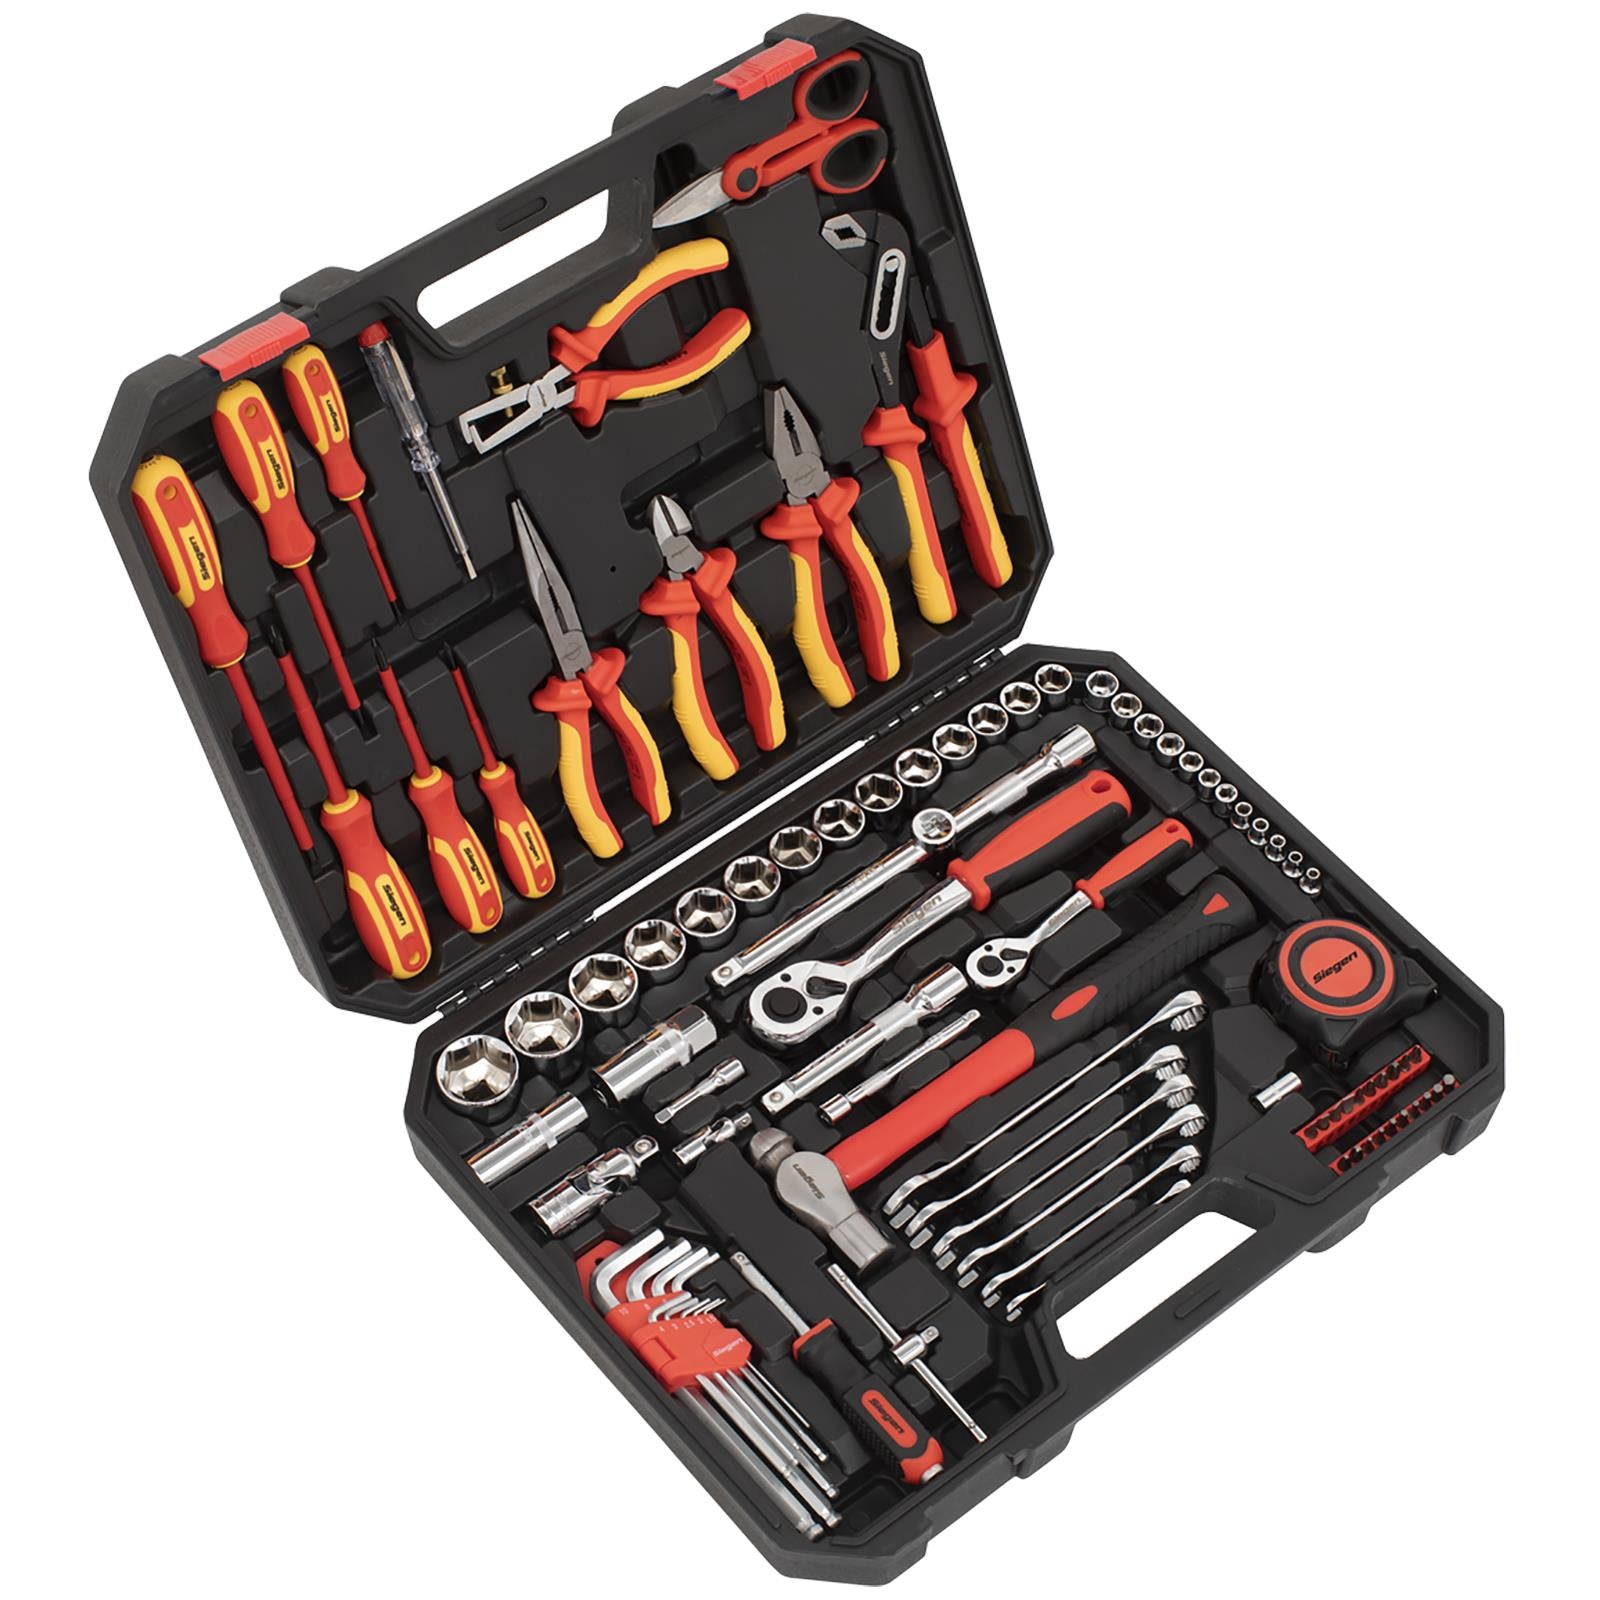 Siegen by Sealey Electrician's Tool Kit 90 Piece VDE Approved Pliers and Screwdrivers